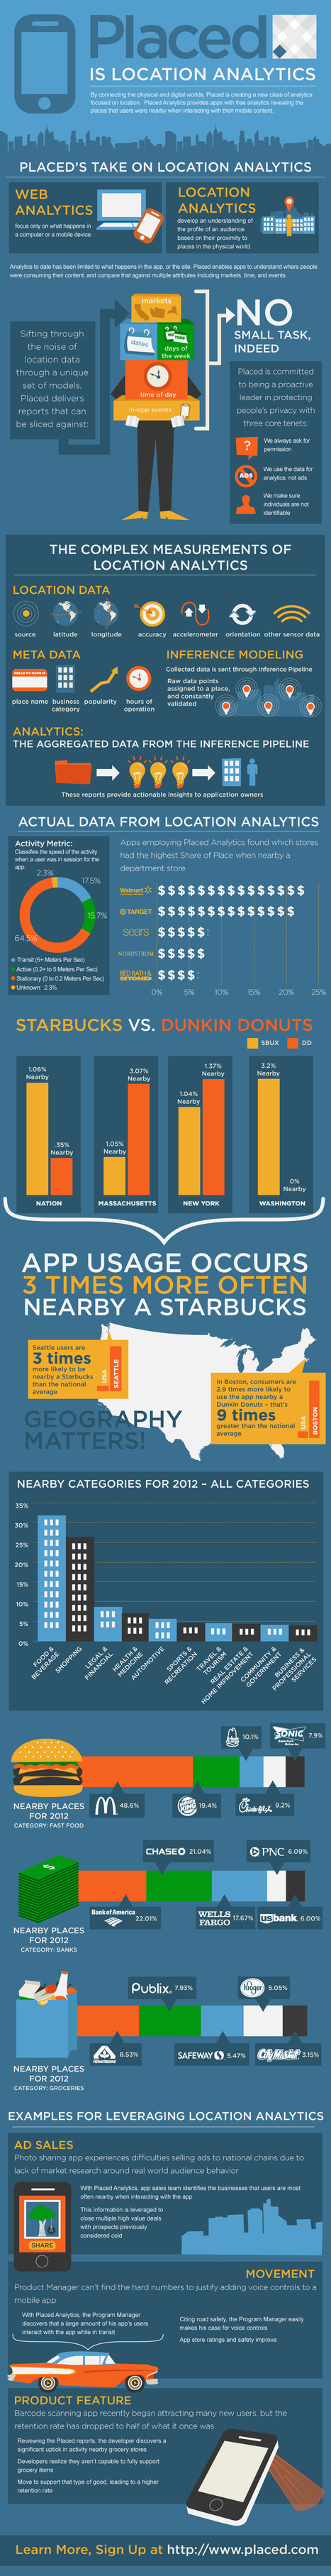 How Placed maps mobile app usage down to the store | Mobile Technology | Scoop.it